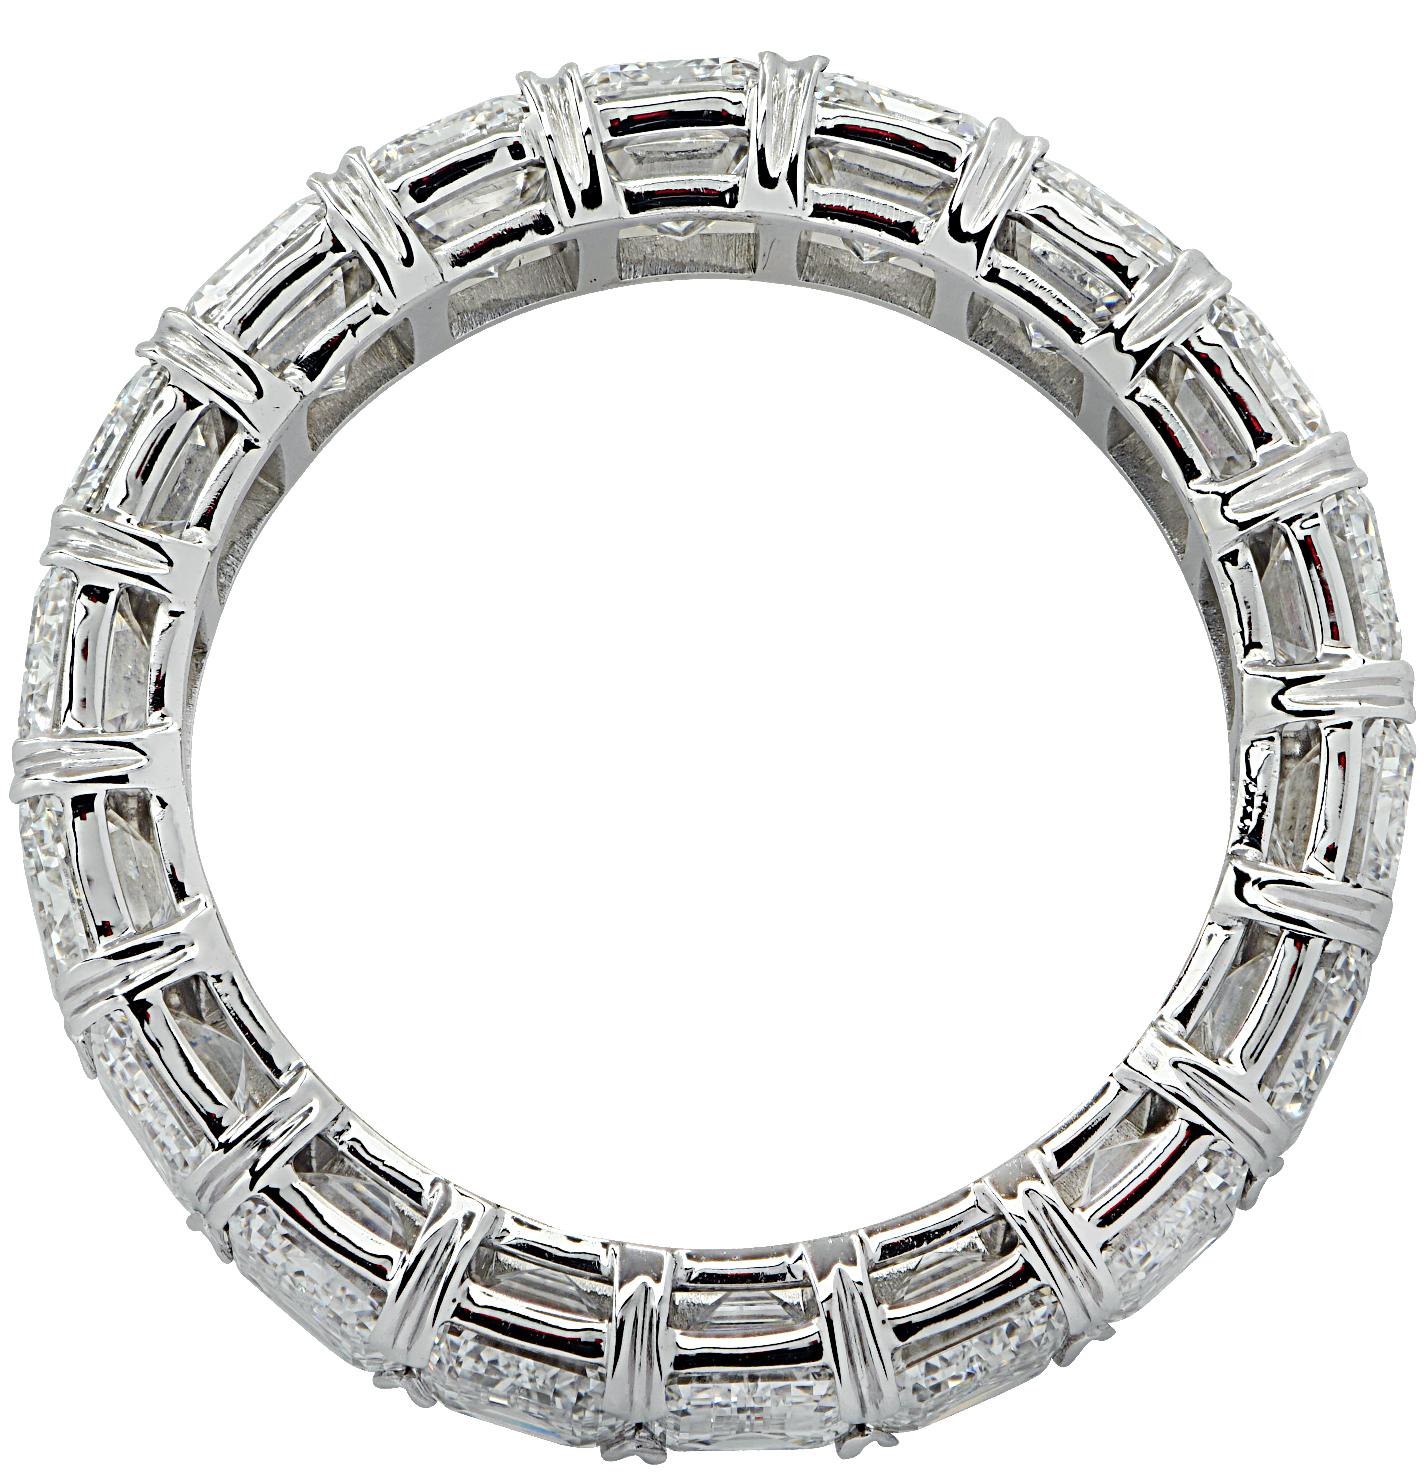 Exquisite Vivid Diamonds eternity band crafted in Platinum, showcasing 19 stunning GIA Certified emerald cut diamonds weighing 7.72 carats total, D-G color, VVS1-VS1 clarity. Each diamond was carefully selected, perfectly matched, and set in a